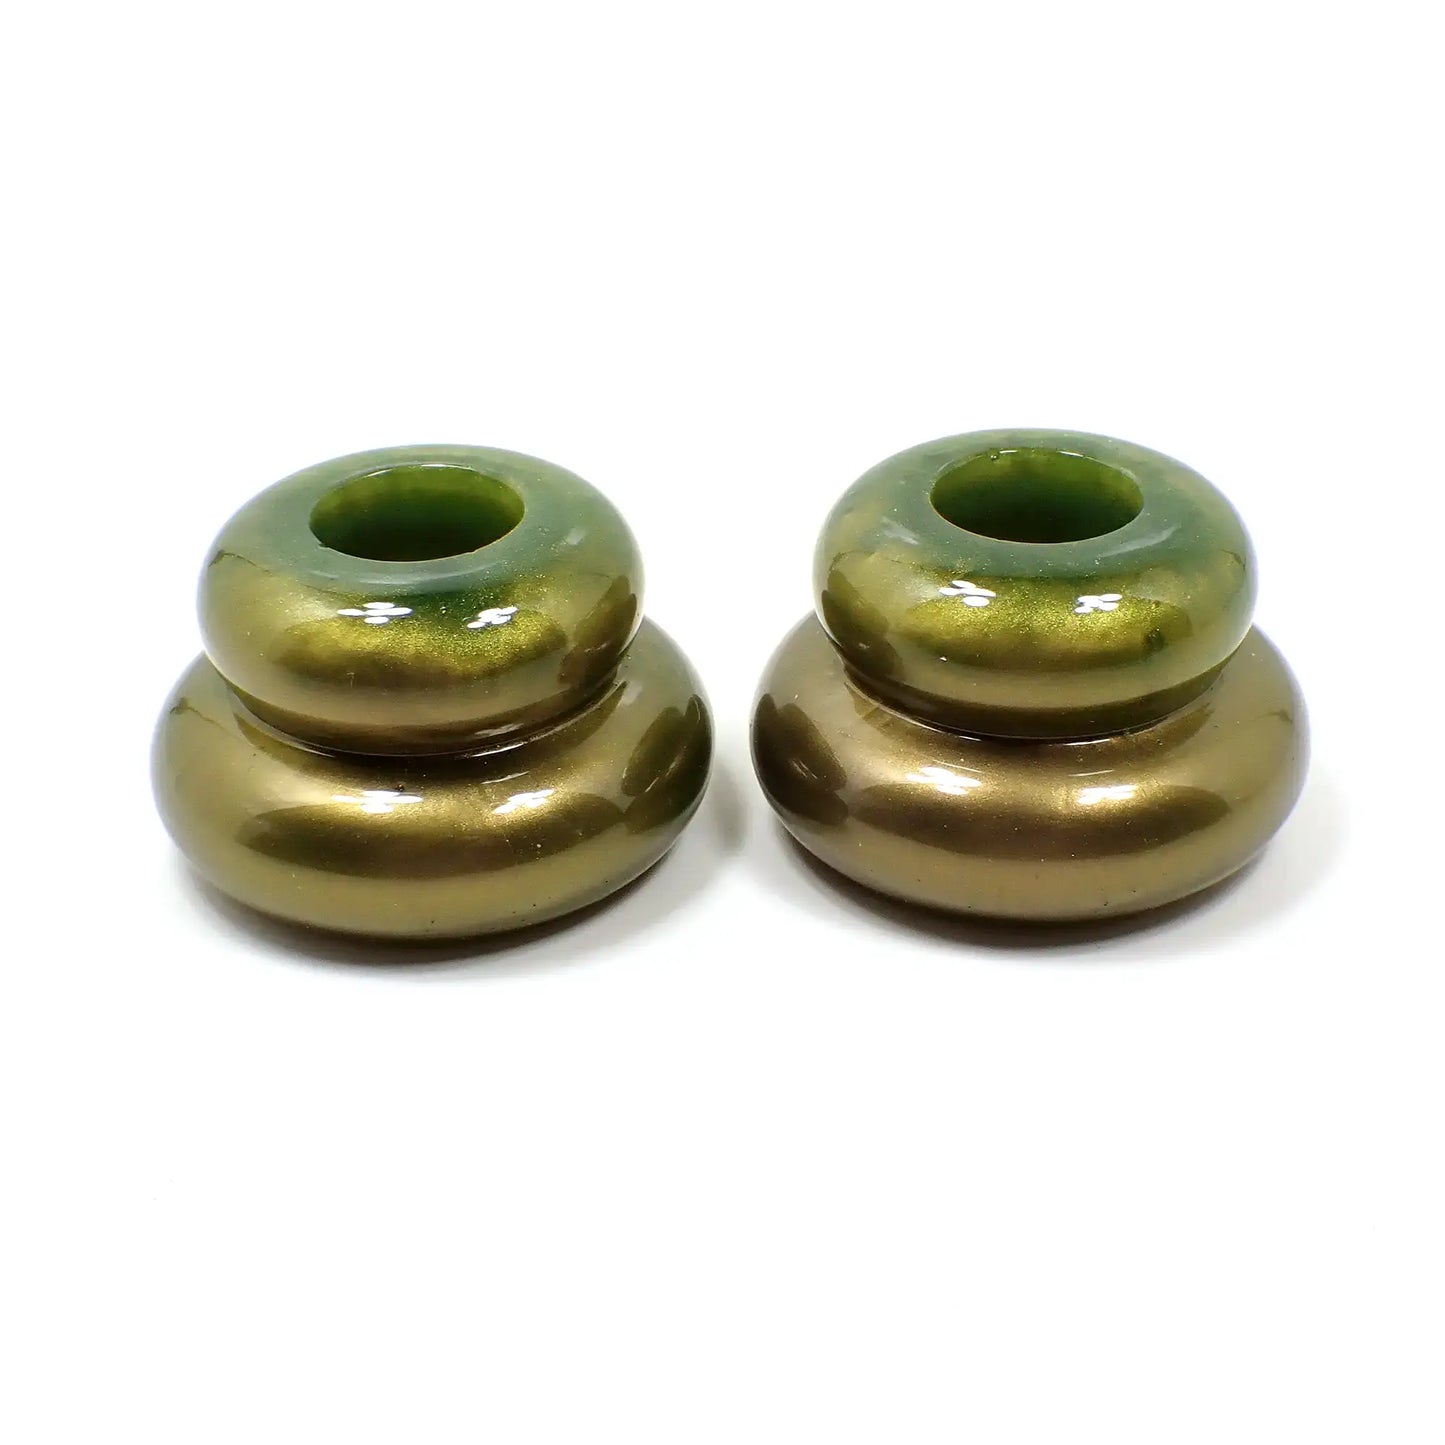 Set of Two Pearly Olive Green and Golden Brown Resin Handmade Puffy Round Double Ring Candlestick Holders